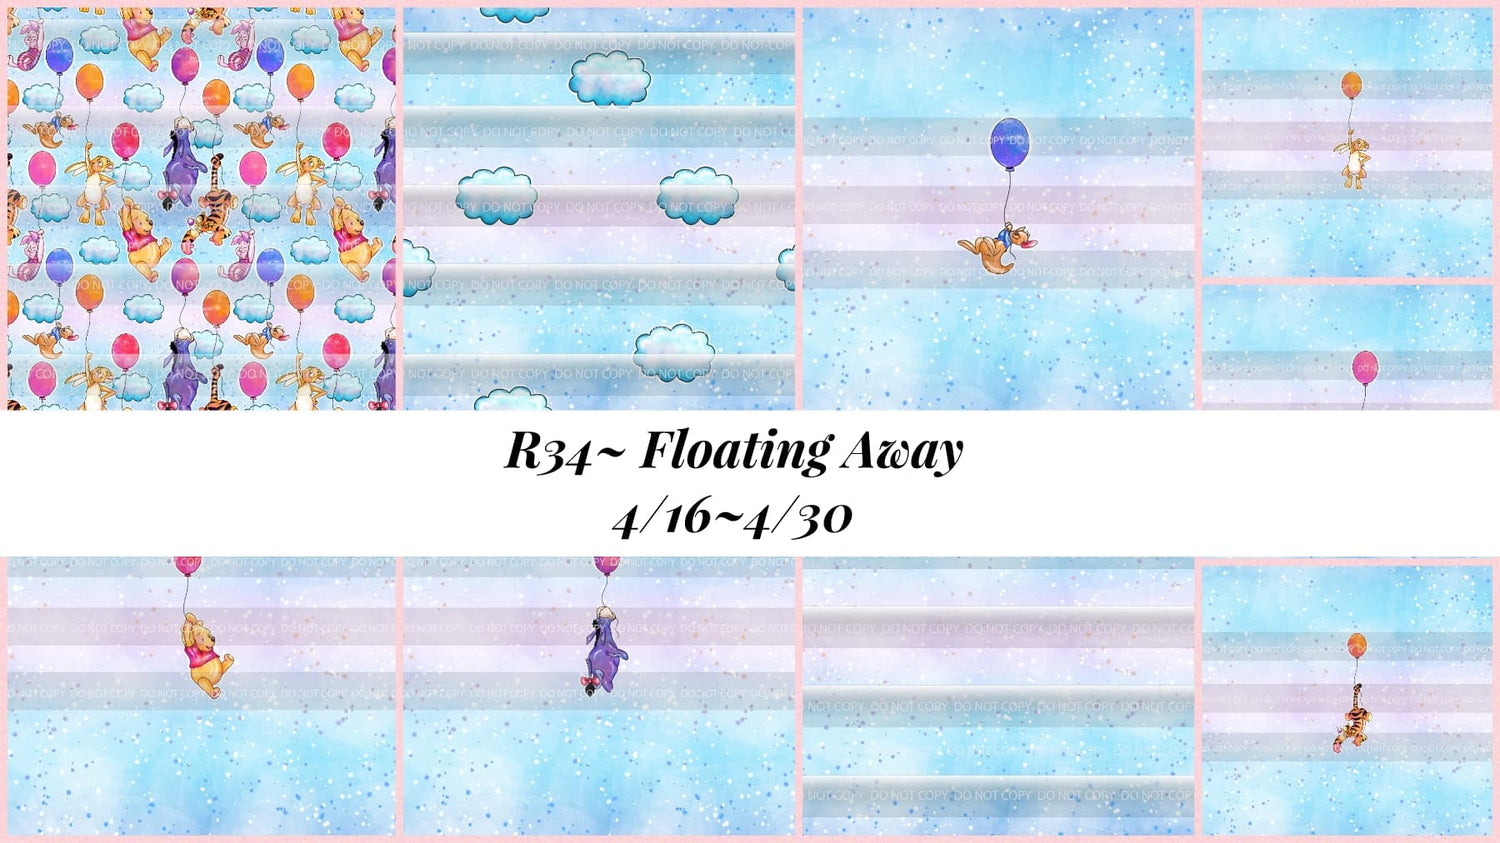 Preorder R34 Floating Away